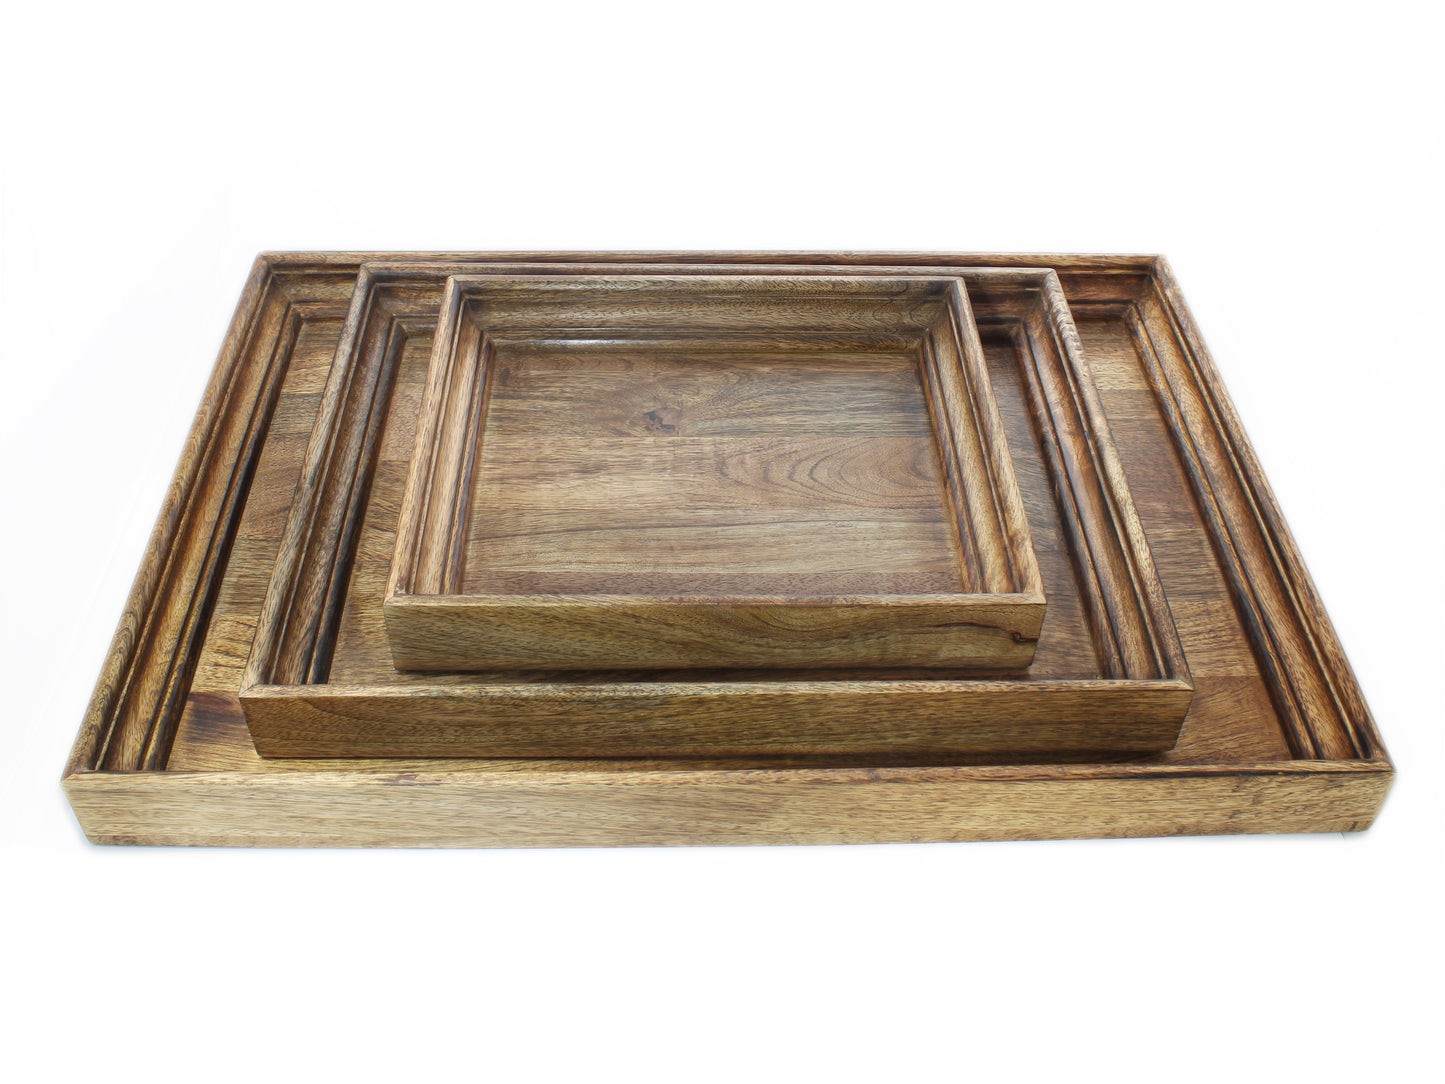 Extra Large Serving Tray Wooden Tea Coffee Breakfast 24 x 17 inches set of 3